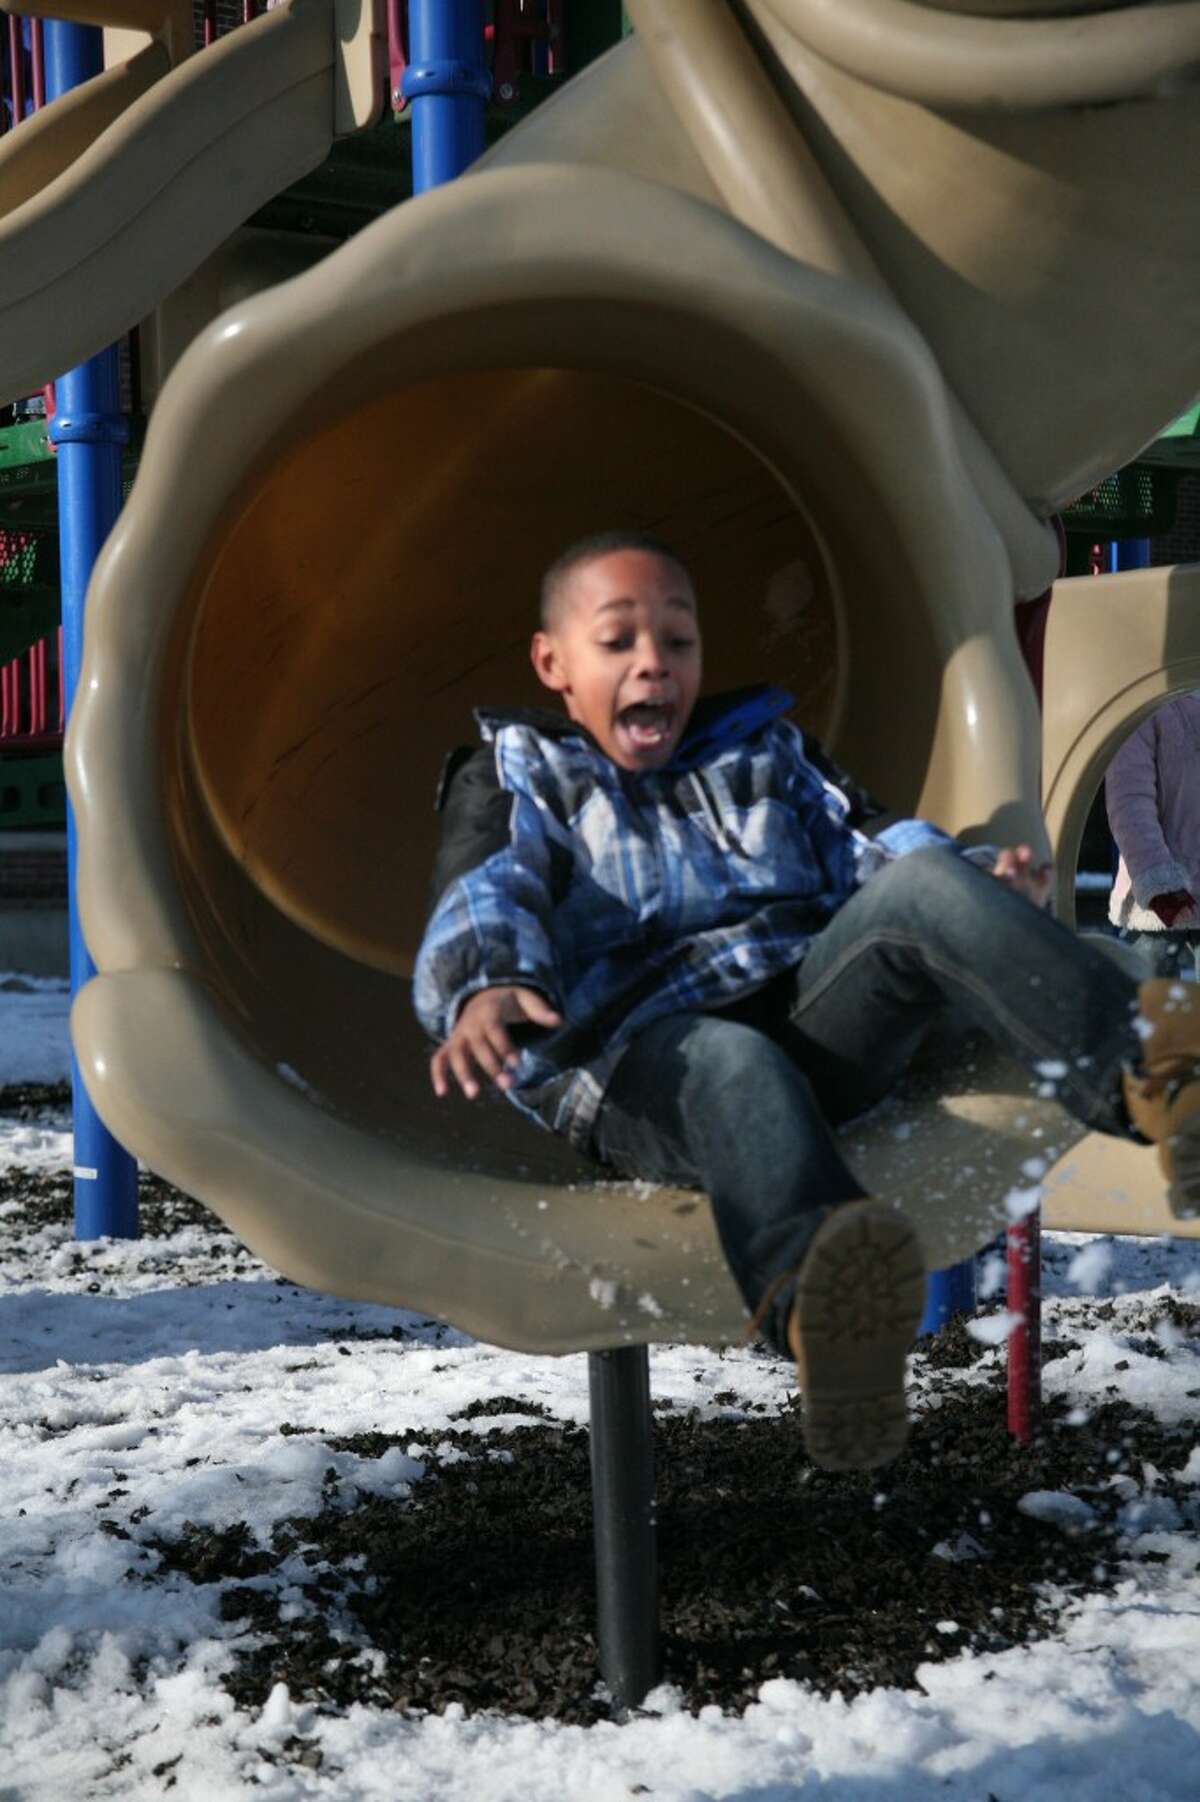 WINTER FUN: Third grade students at Crossroads Charter Academy’s elementary school enjoyed an outdoor afternoon recess on Monday. Every district within the MOISD resumed classes following a two-week winter break on Monday except Big Rapids Public Schools, which resume today.